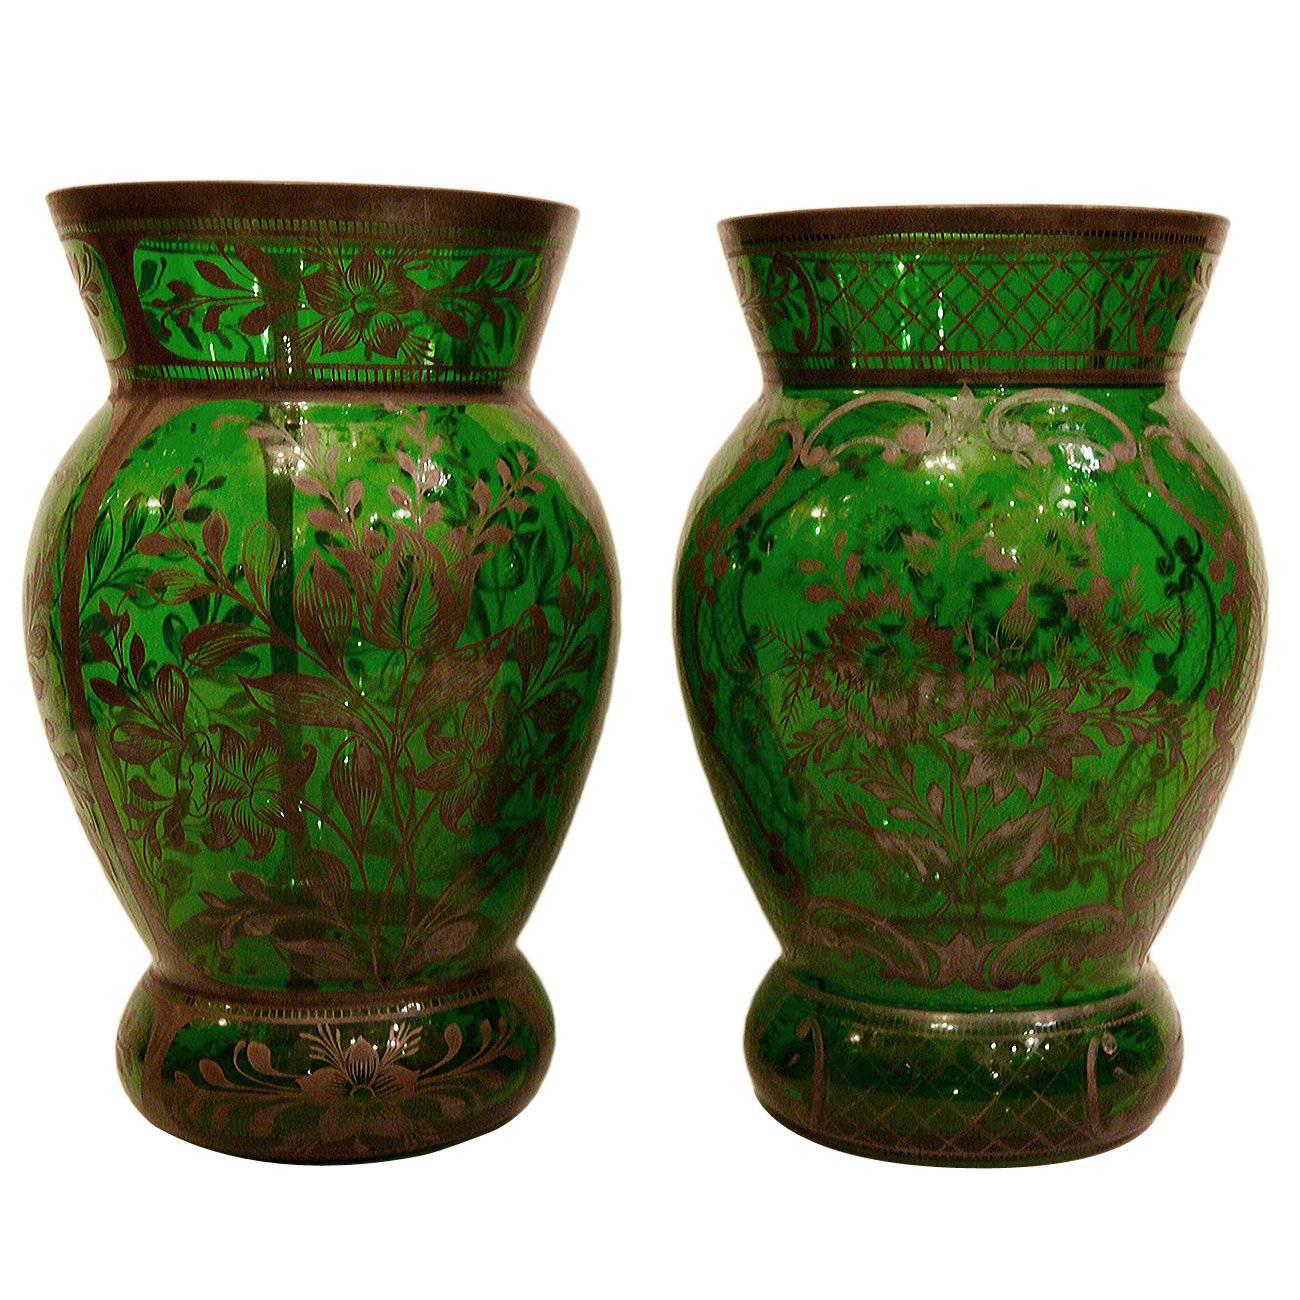 Pair of Green Glass Vases with Silver Inlay